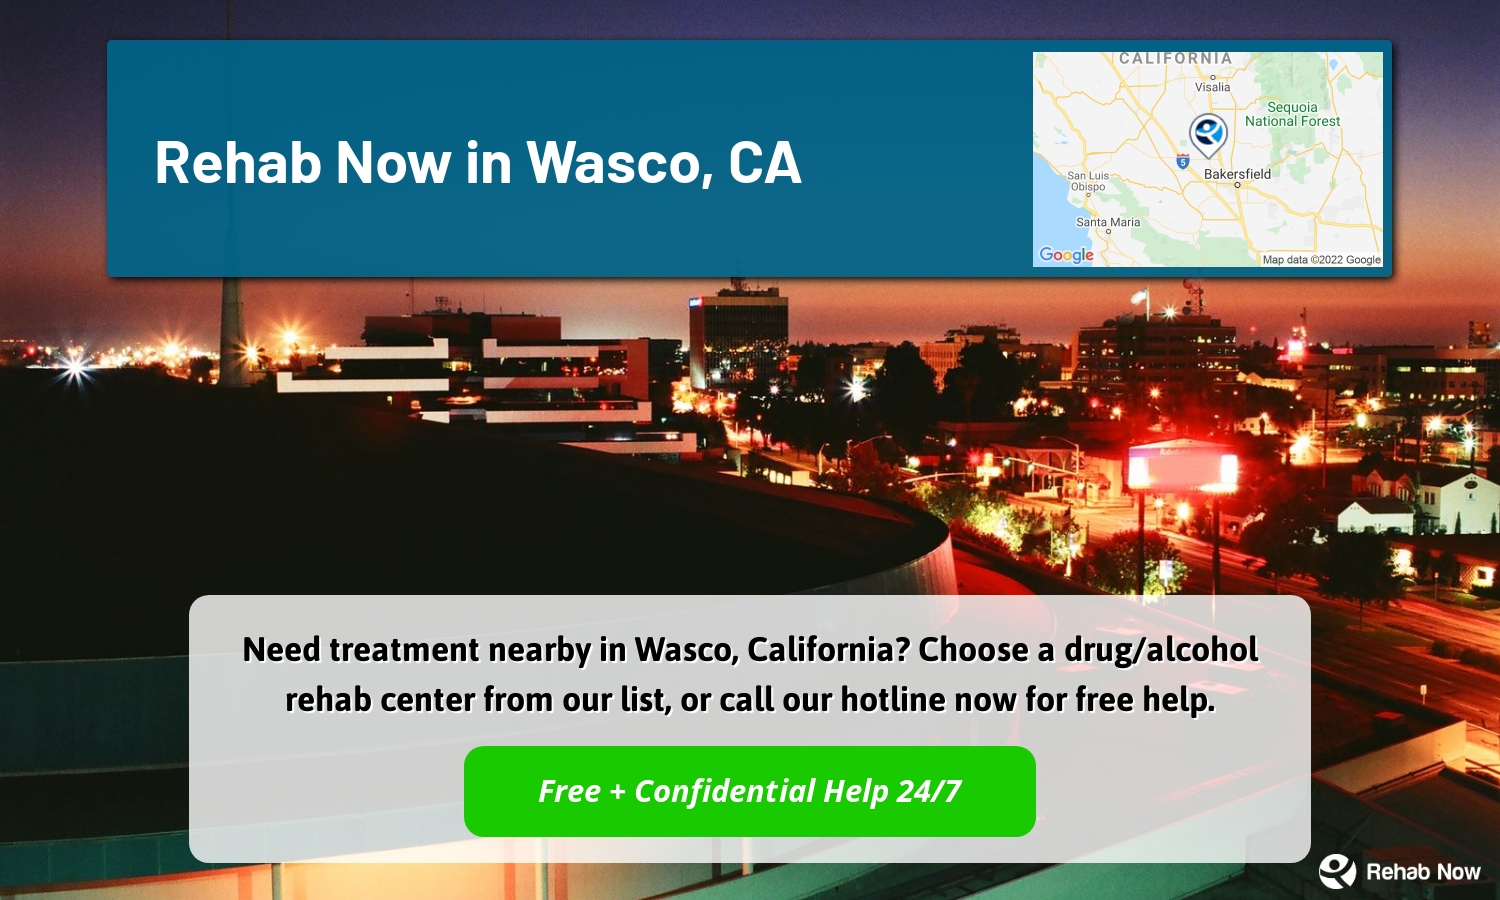 Need treatment nearby in Wasco, California? Choose a drug/alcohol rehab center from our list, or call our hotline now for free help.